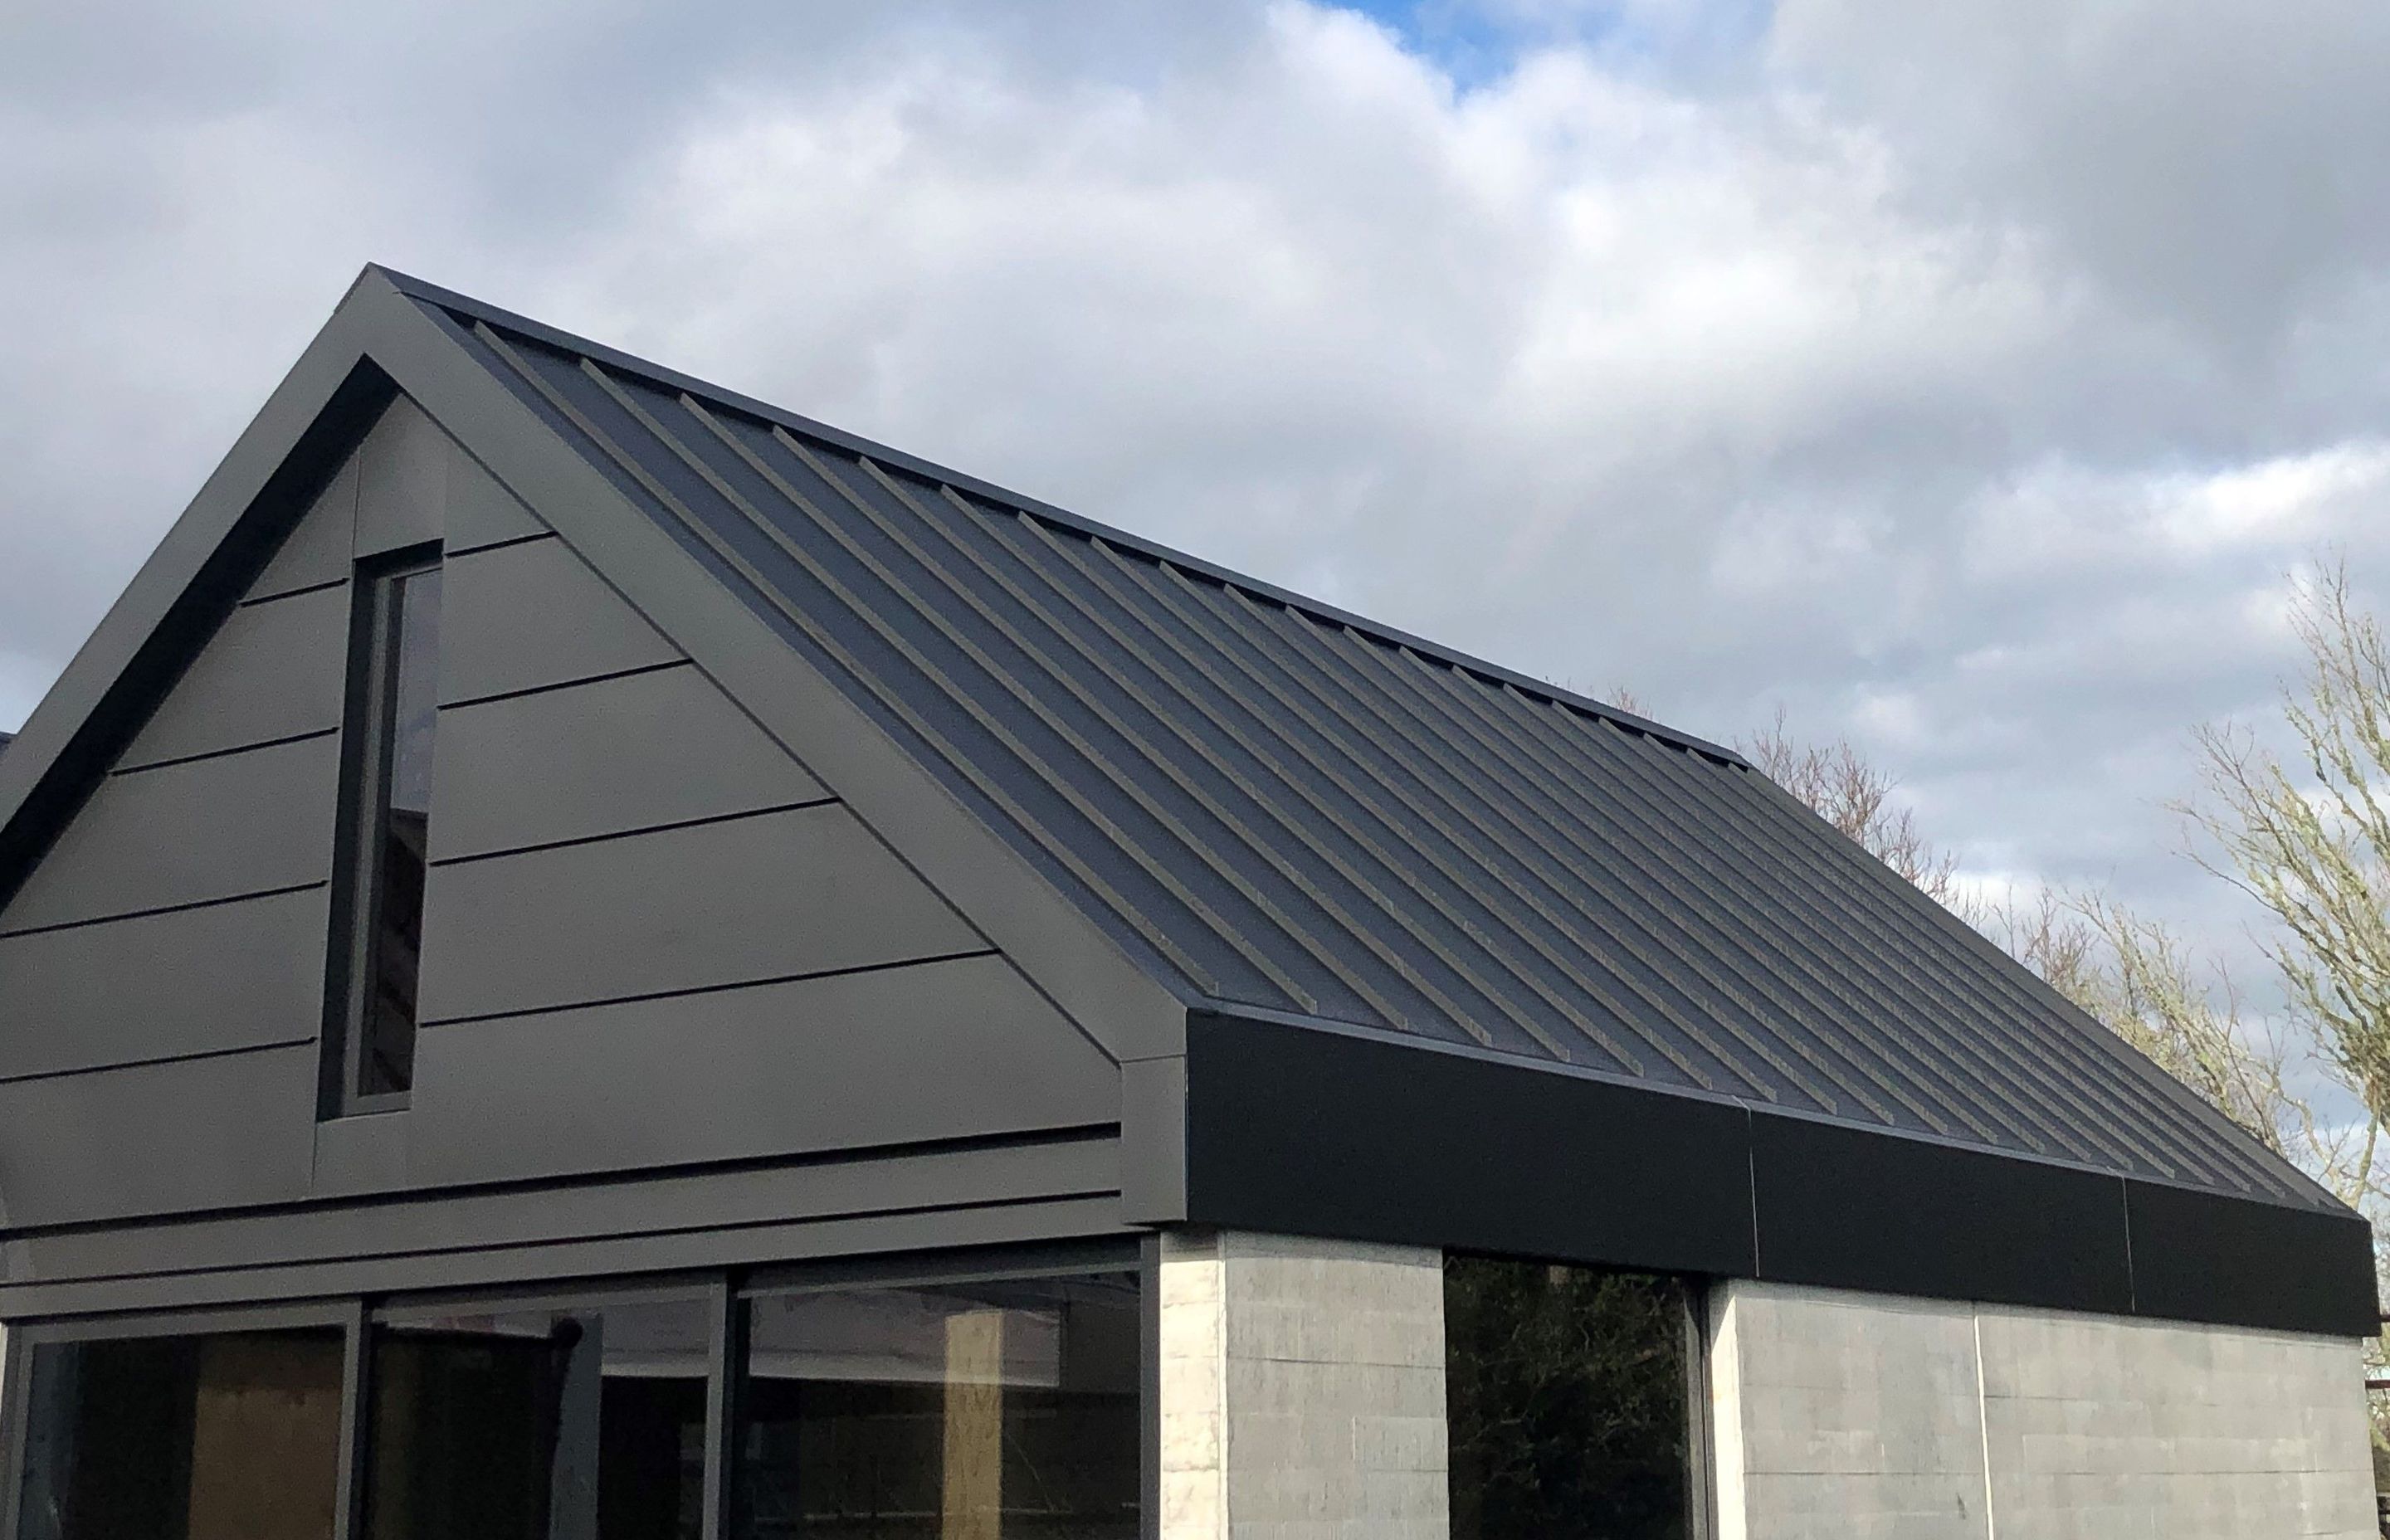 Gotham Black, from the new EURAMATTES range, has been developed to suit a wide range of architectural styles as well as complement a number of other building materials.